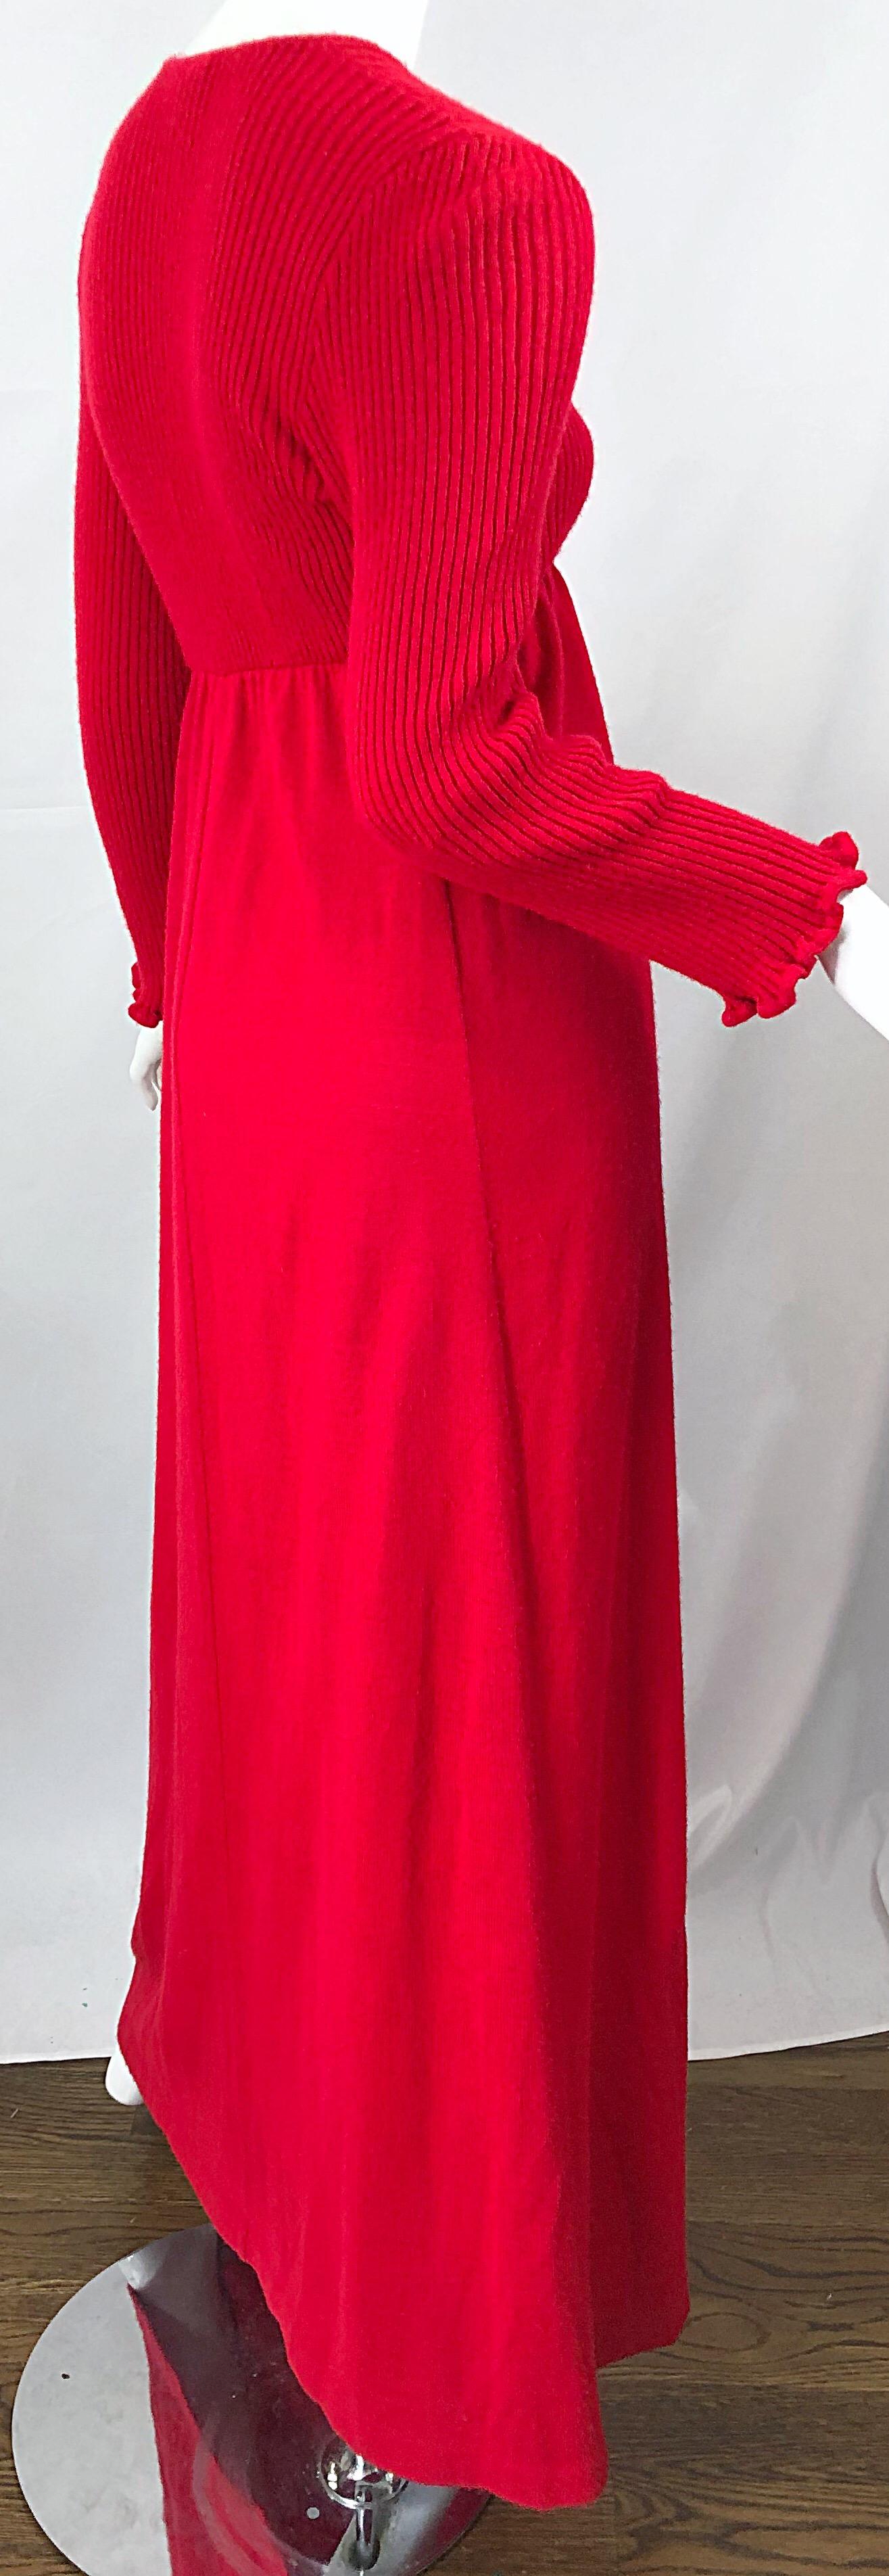 Vintage Joseph Magnin 1970s Lipstick Red Long Sleeve Wool 70s Sweater Maxi Dress In Excellent Condition For Sale In San Diego, CA